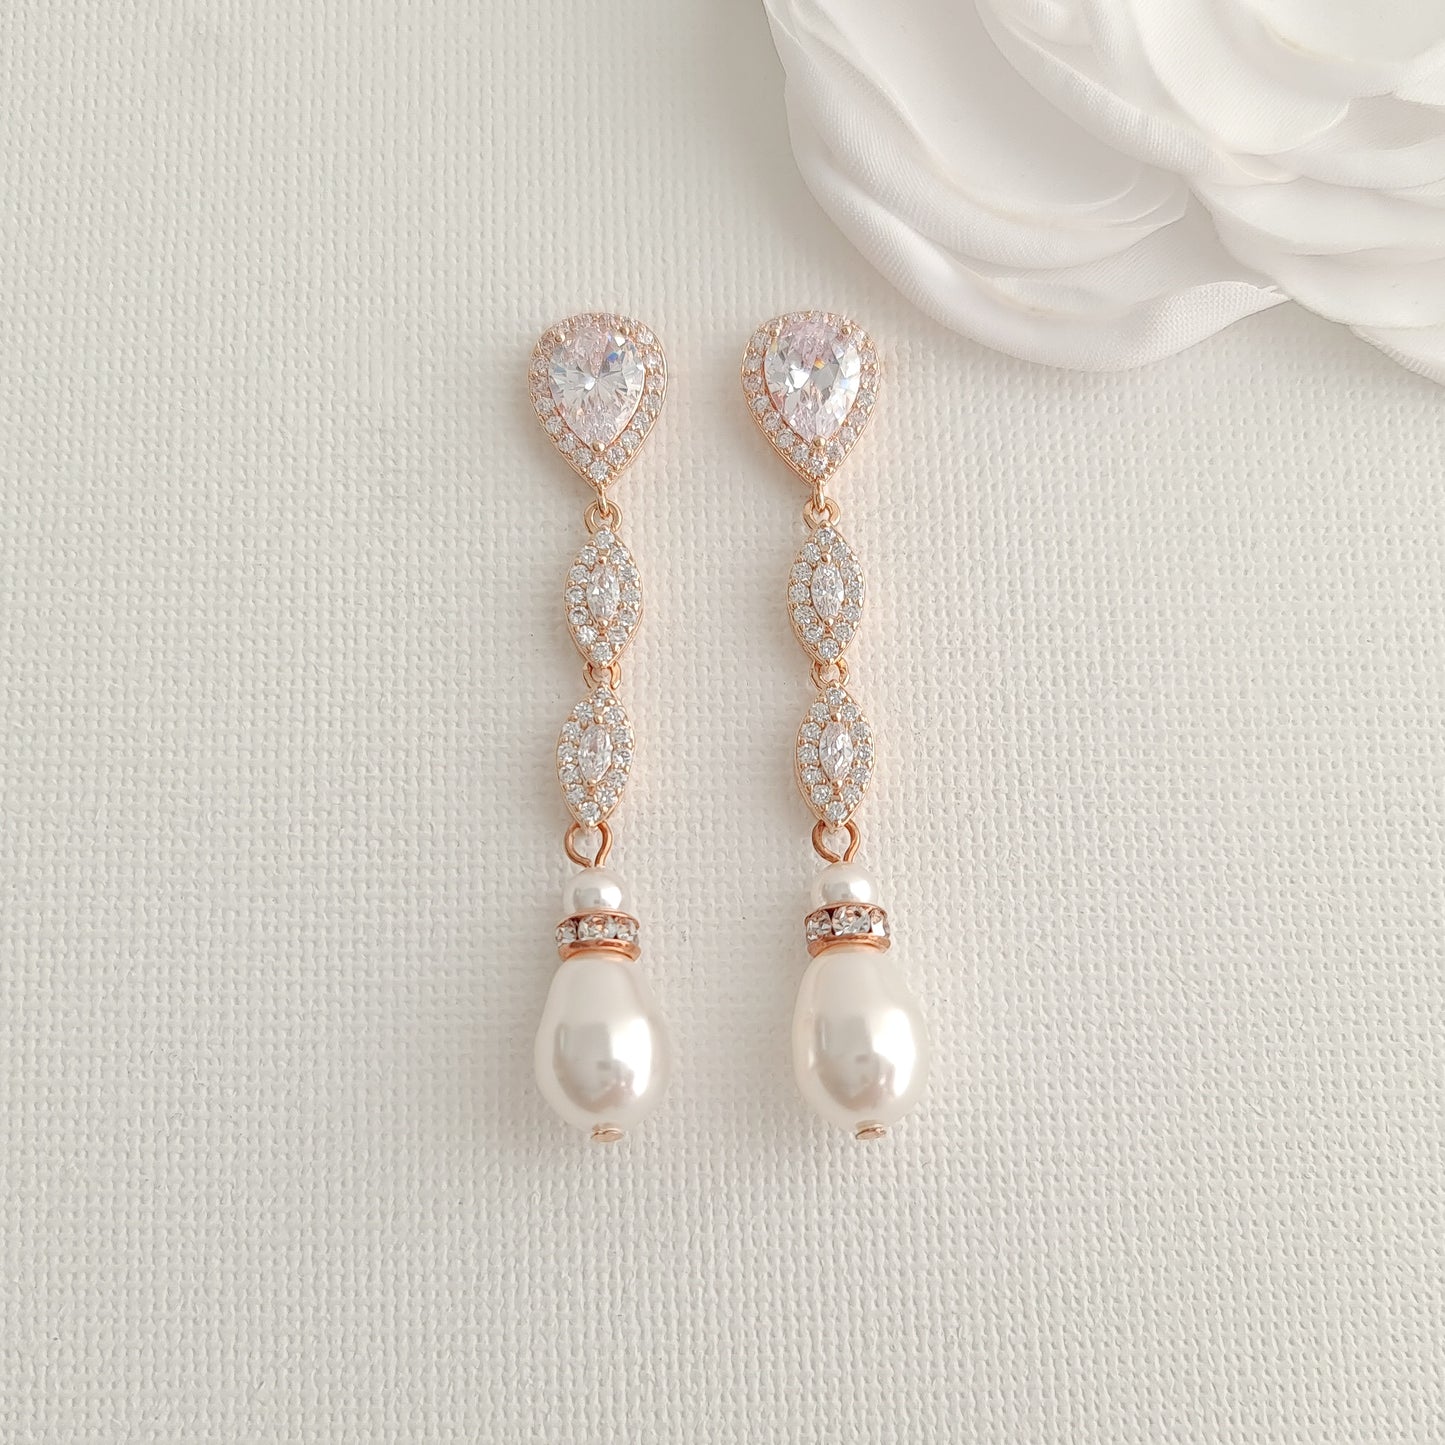 Gold and Pearl Jewelry Set for Wedding-Abby